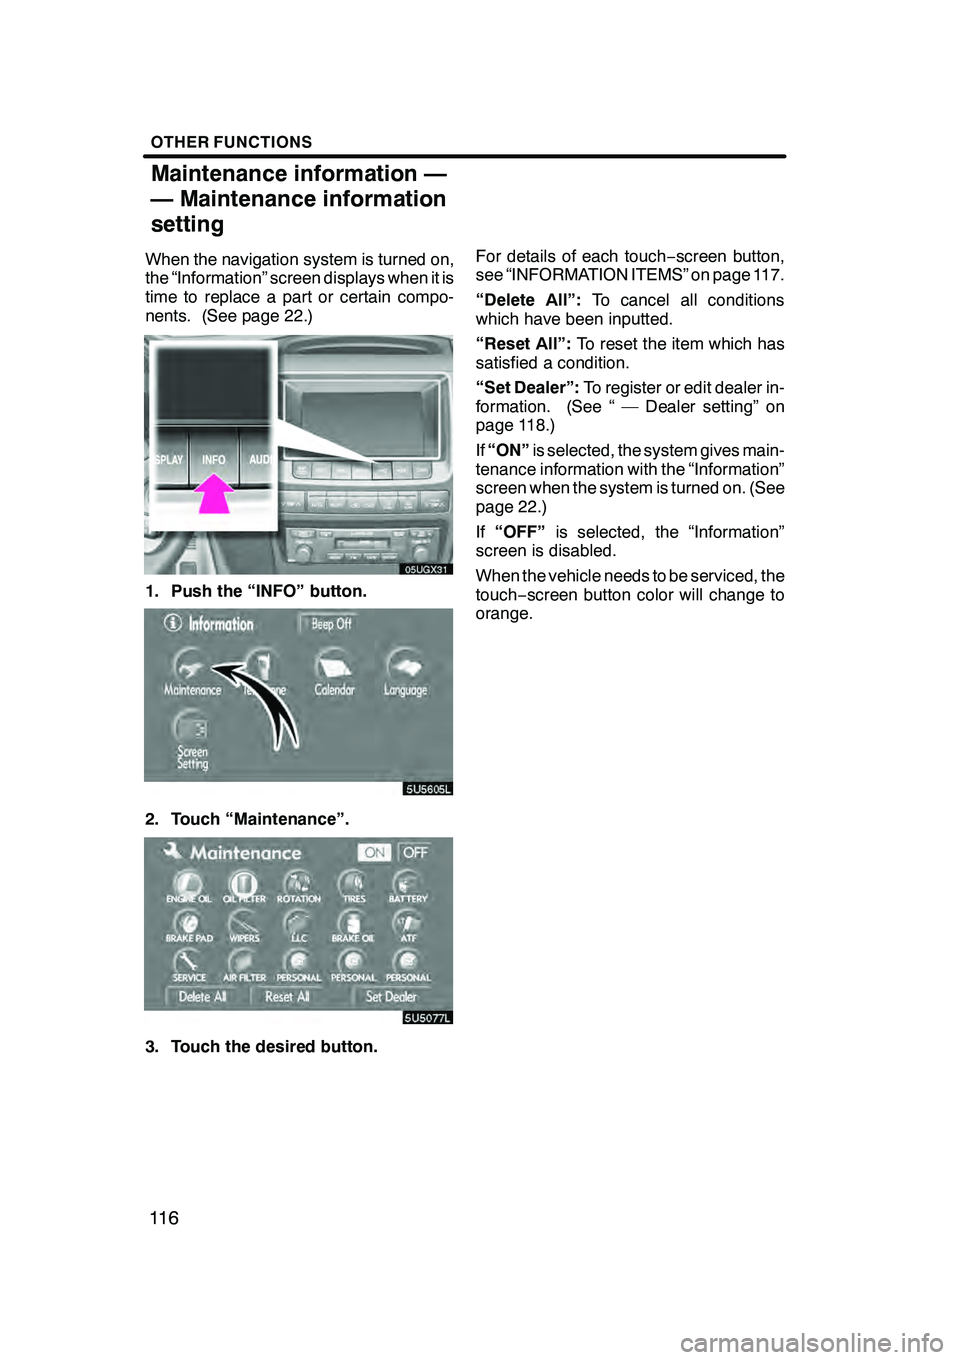 Lexus GX470 2008  Navigation Manual OTHER FUNCTIONS
11 6
When the navigation system is turned on,
the “Information” screen displays when it is
time to replace a part or certain compo-
nents. (See page 22.)
05UGX31
1. Push the “INF